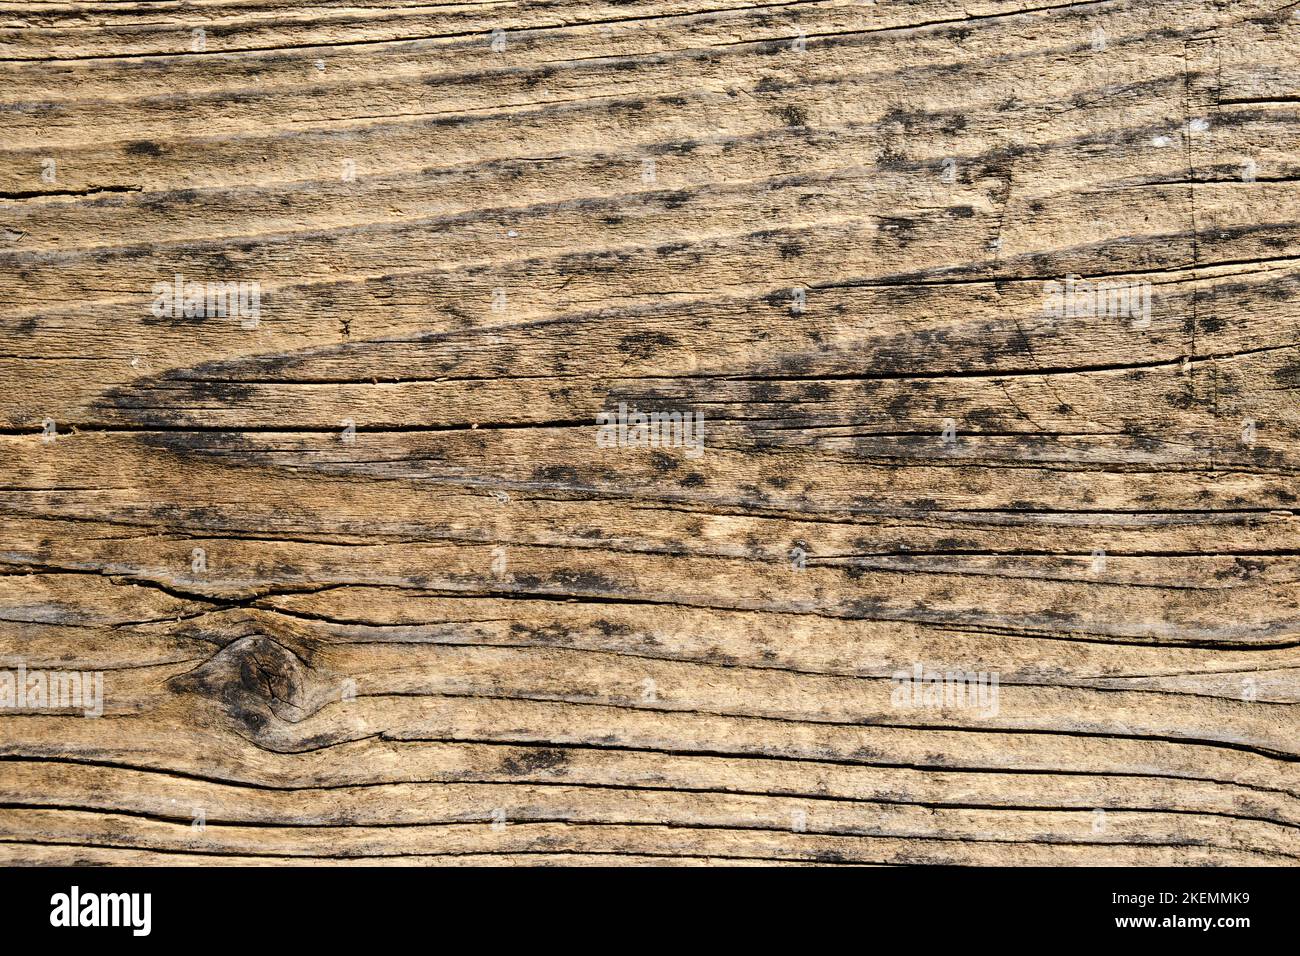 Weathered wooden board with beautiful grain, background. Stock Photo